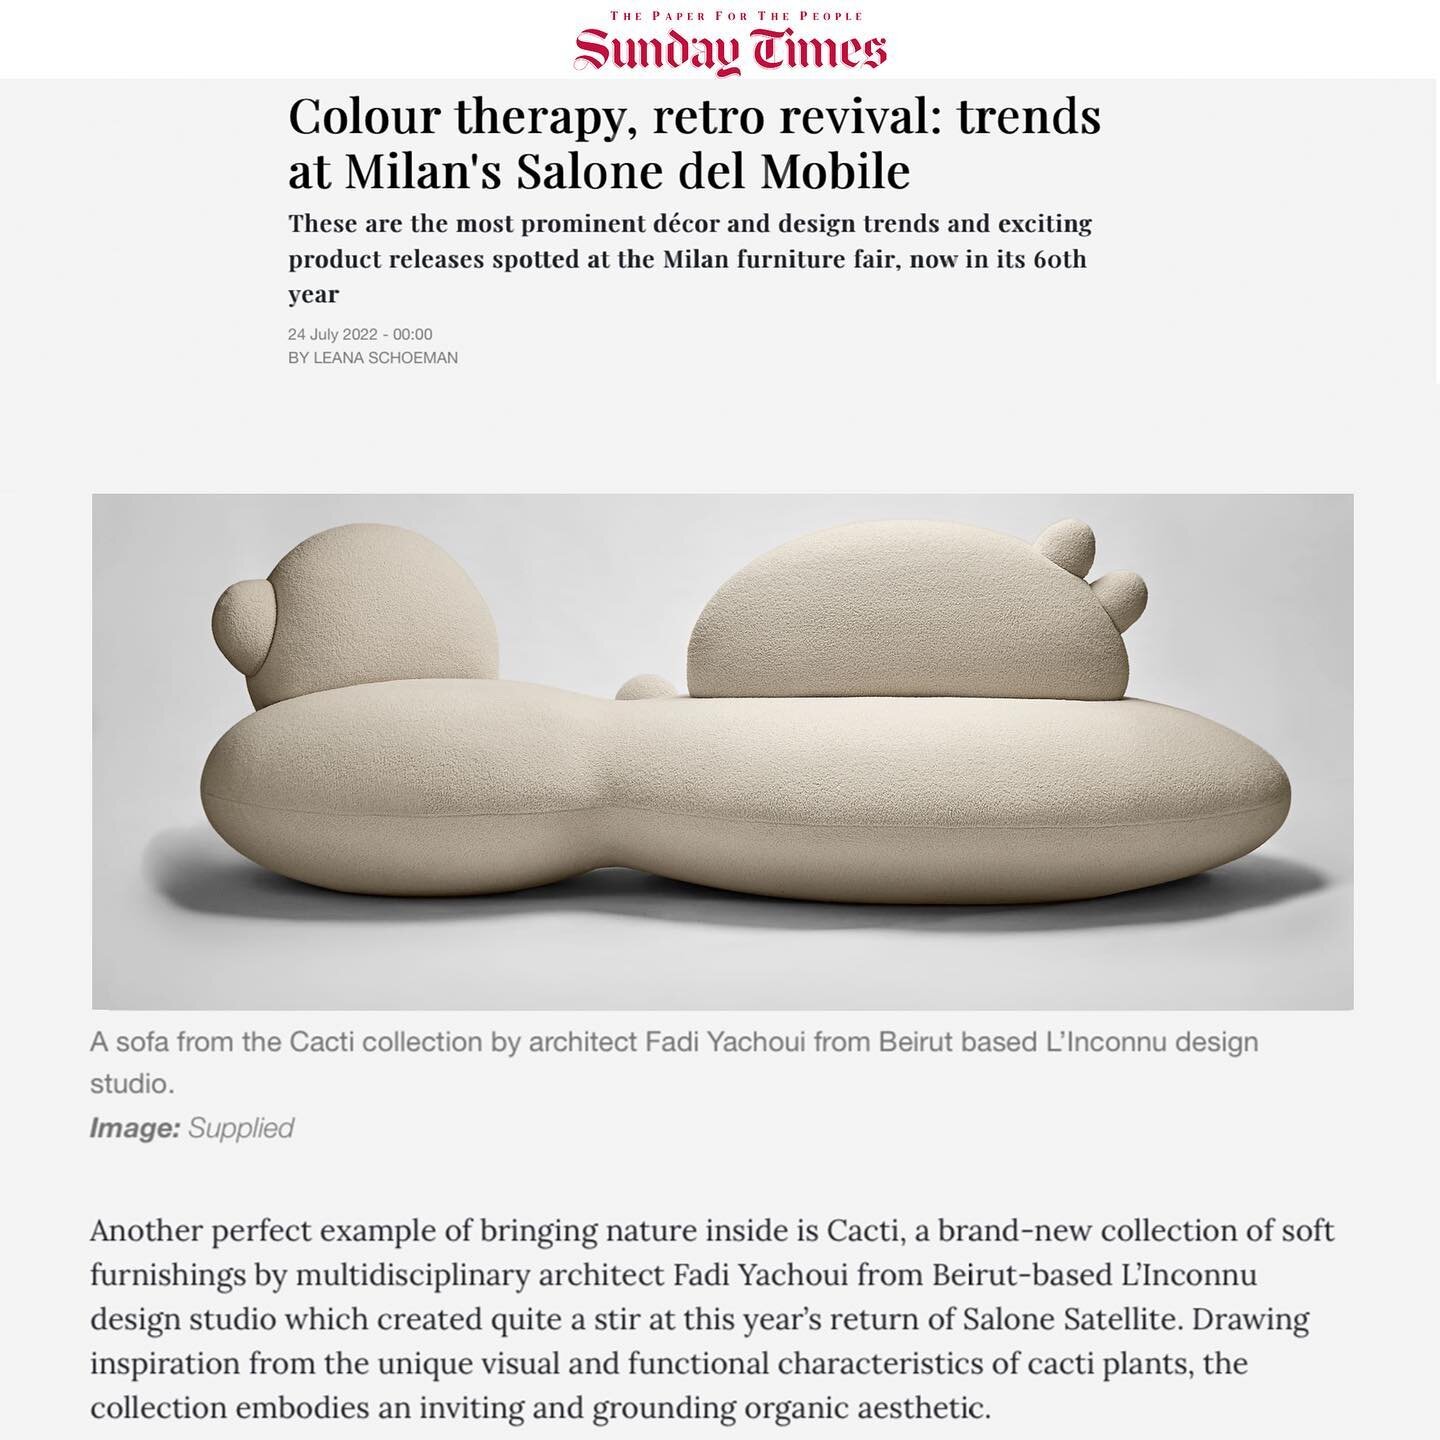 Nopal lounge seater sofa spotted at this year&rsquo;s Milan Design week! Thank you @sundaytimes for the feature 

#linconnu #atelierlinconnu #mdw2022